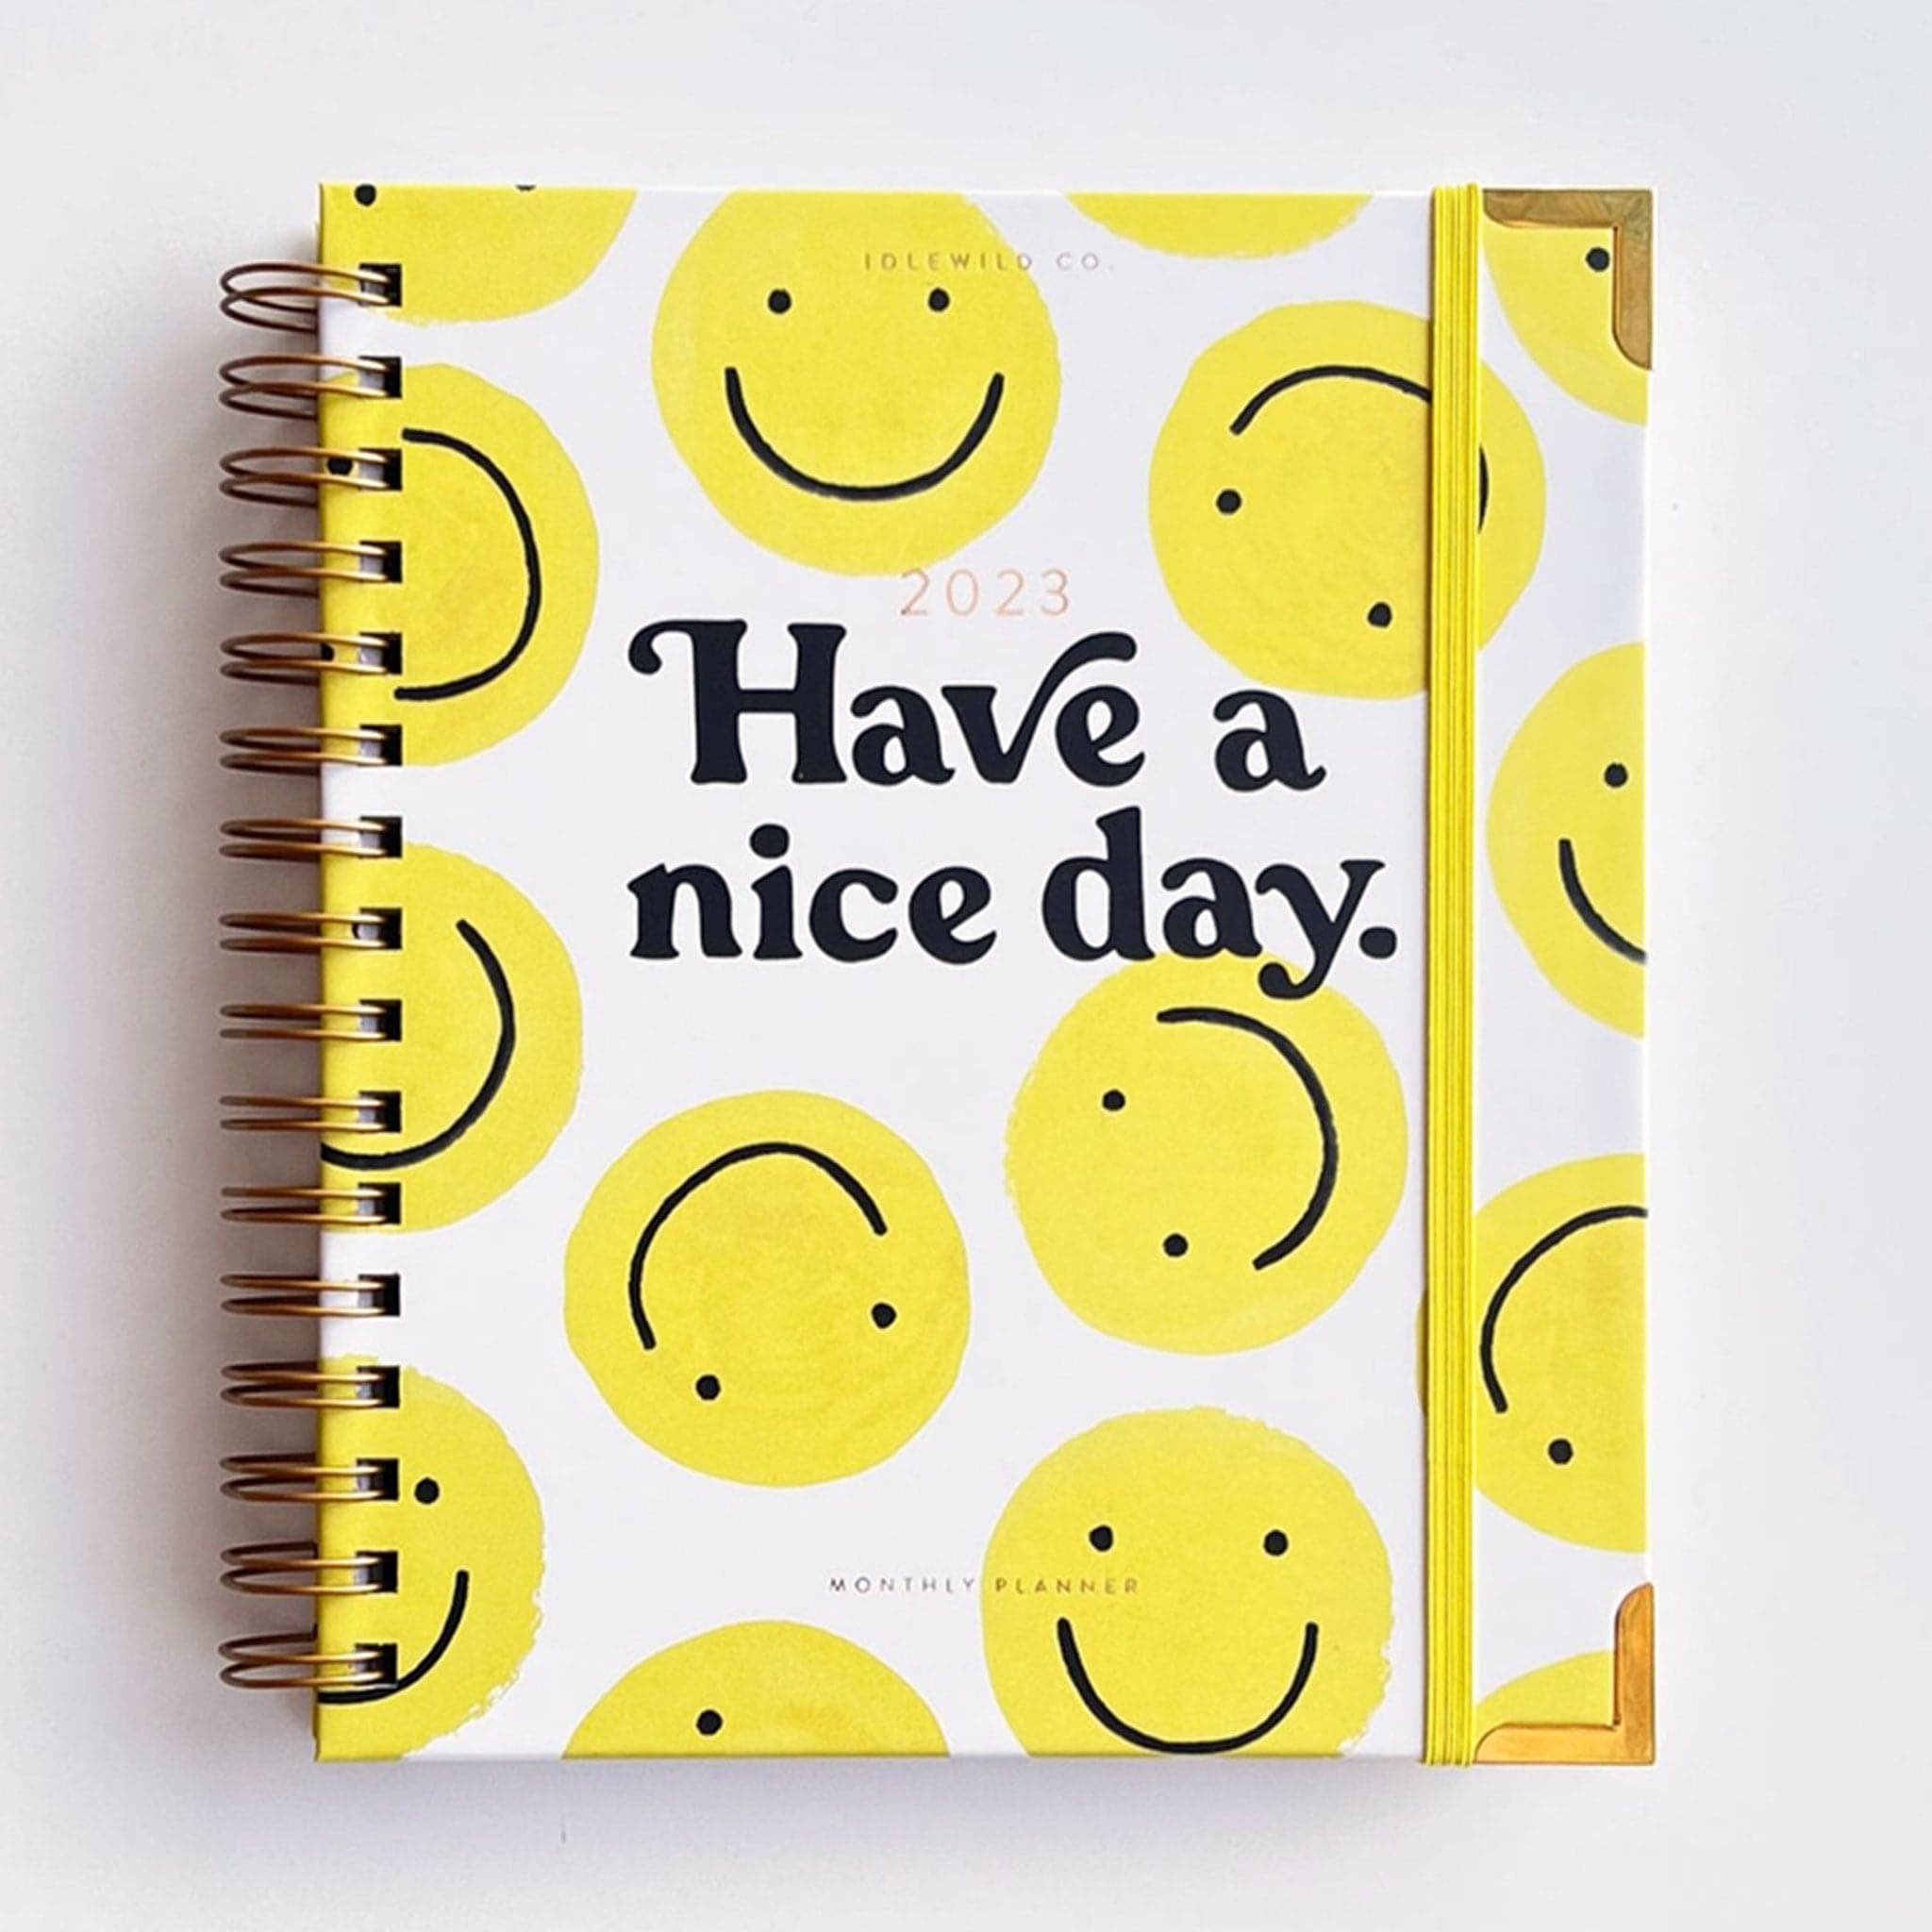 a 2023 planner with yellow smiley face doodles all over.